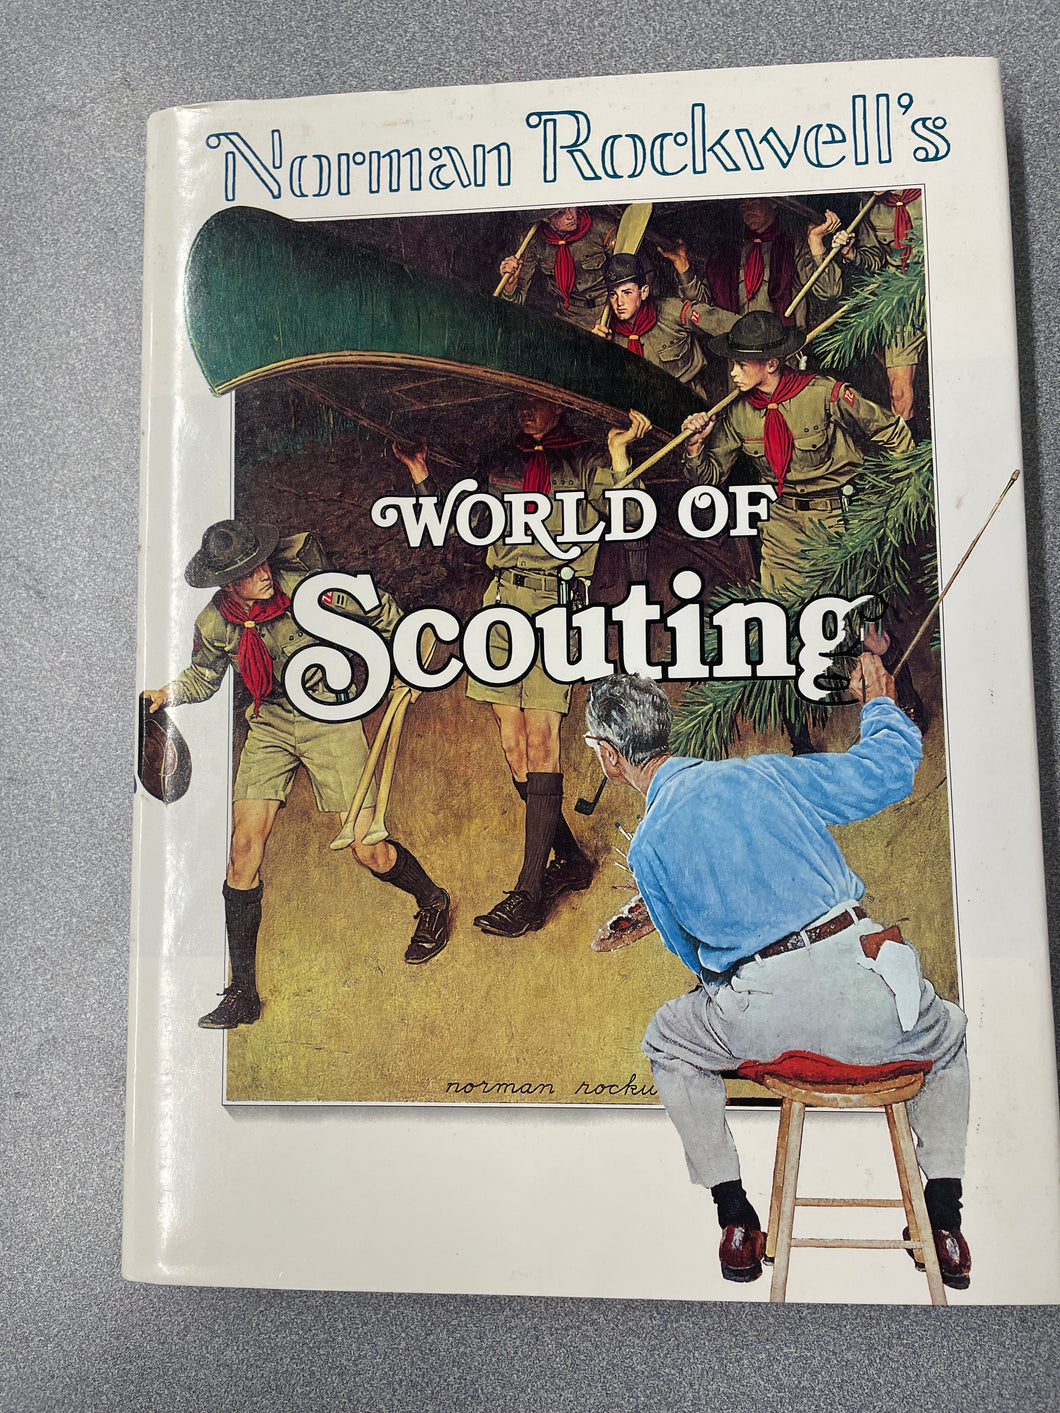 Norman Rockwell's World of Scouting, Hillcourt, William [1977] A 5/24